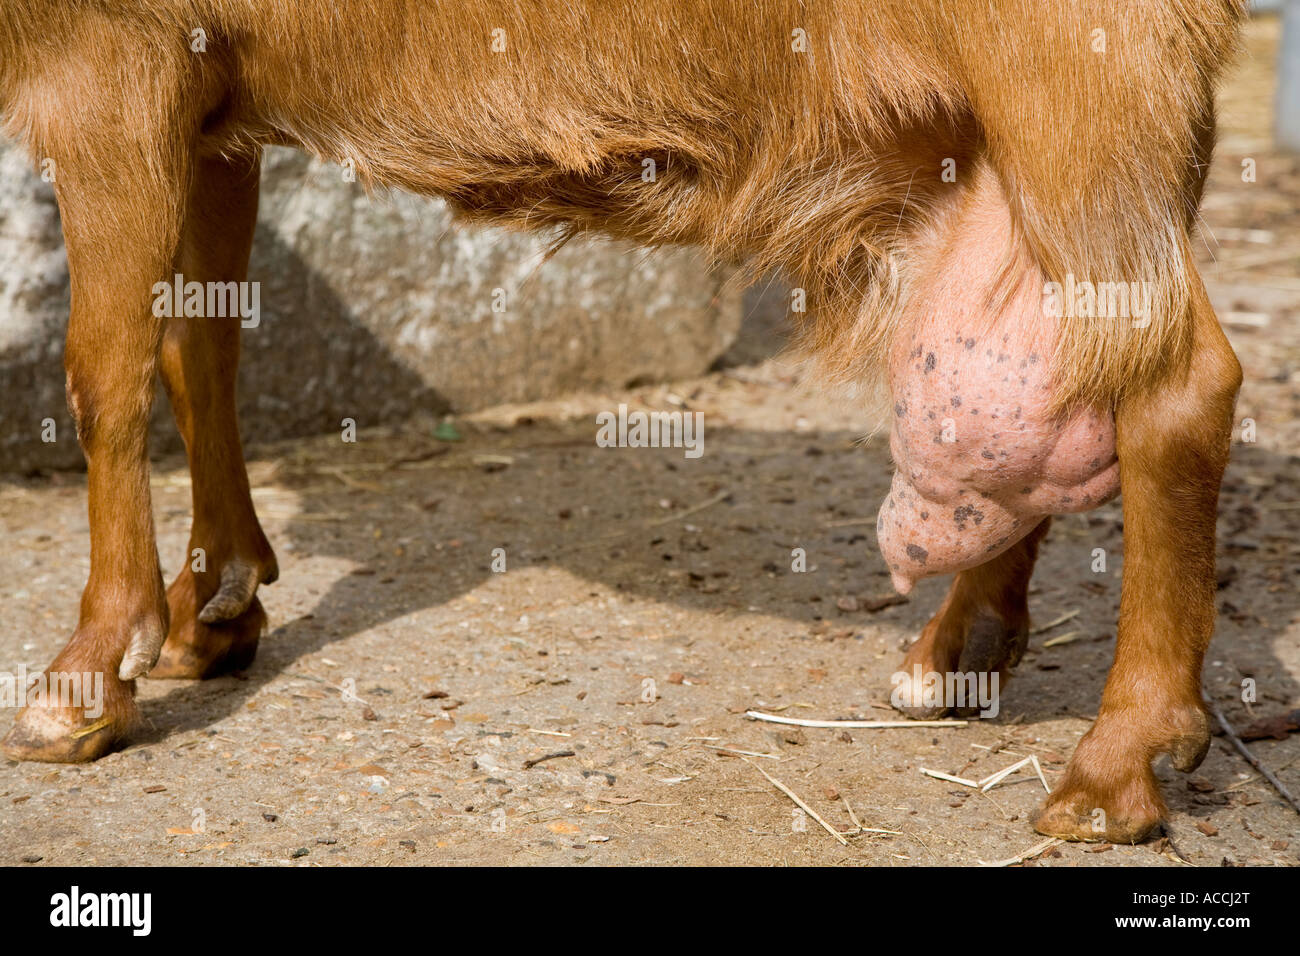 Goat legs and udders Stock Photo - Alamy